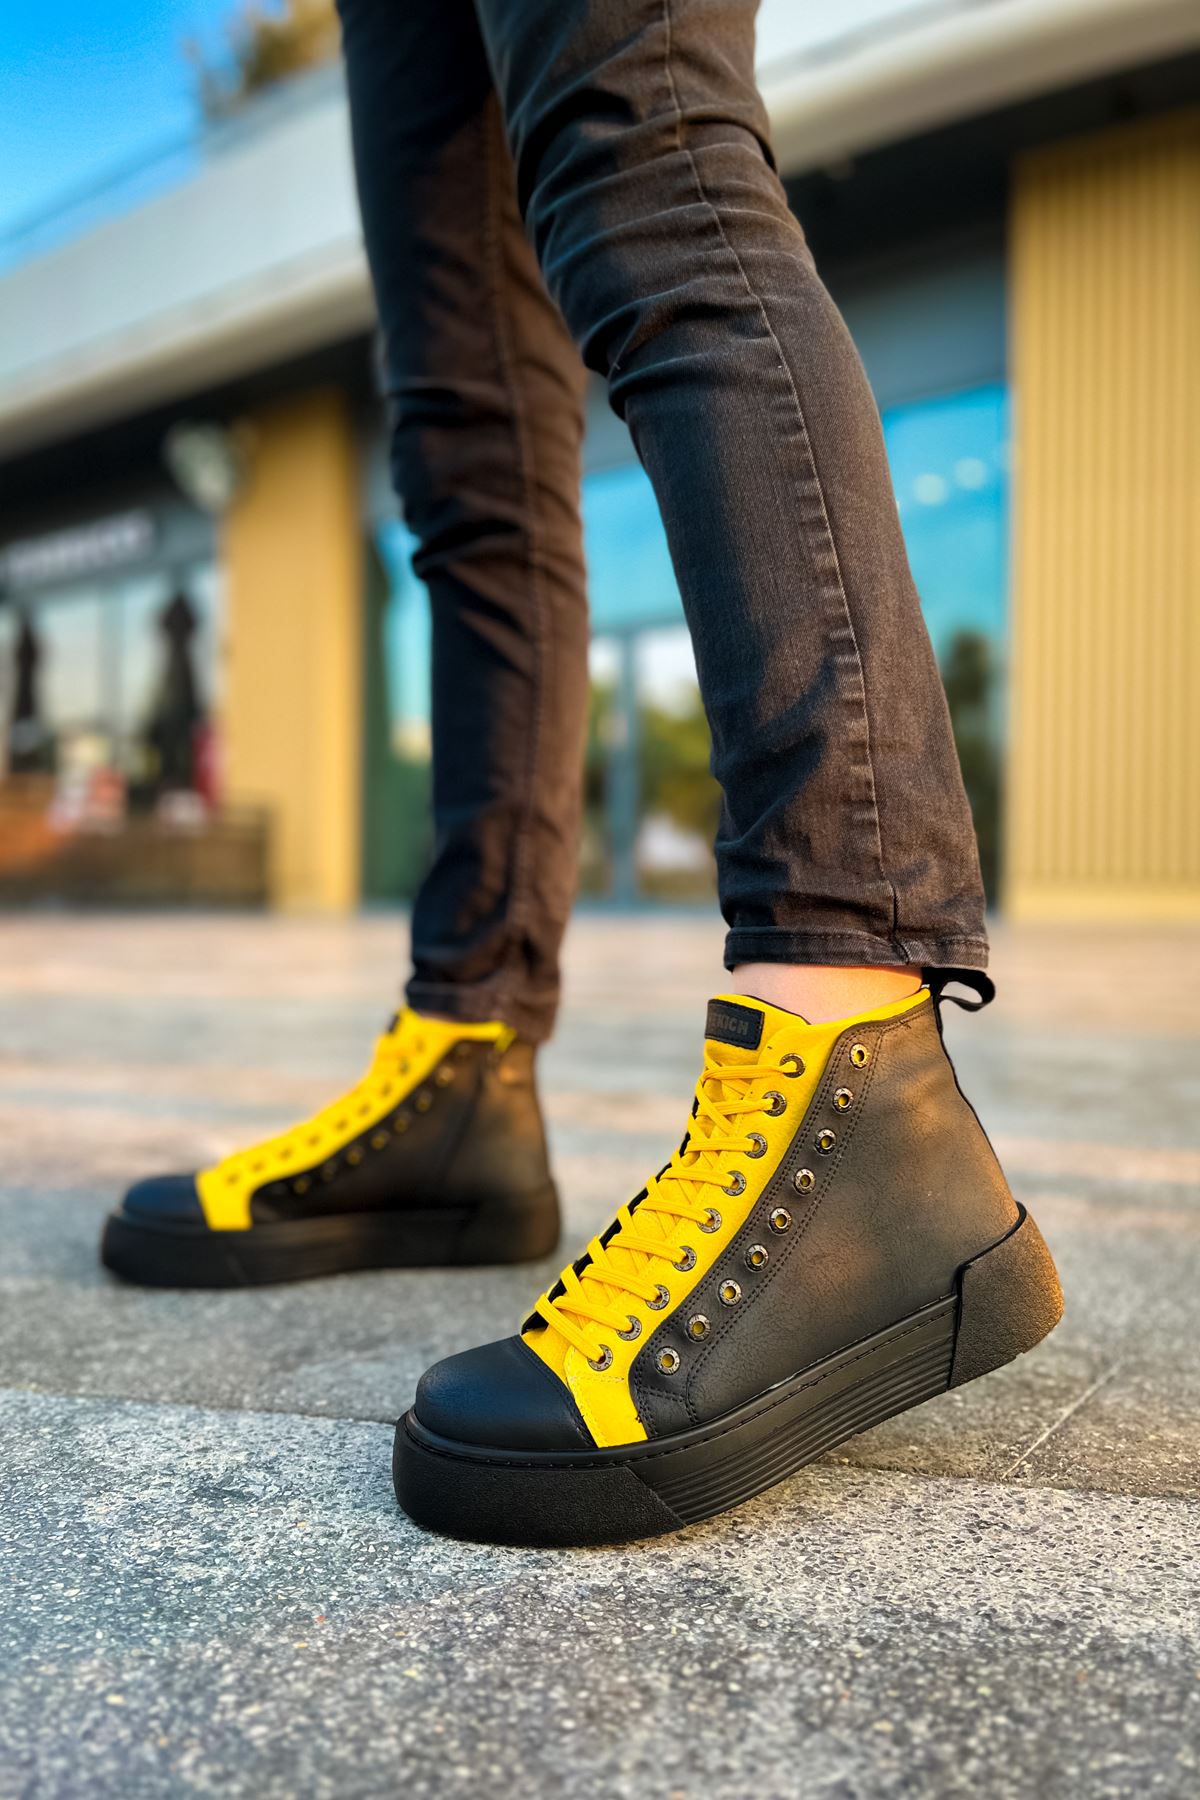 CH167 ST Men's Boots BLACK - YELLOW - STREETMODE ™